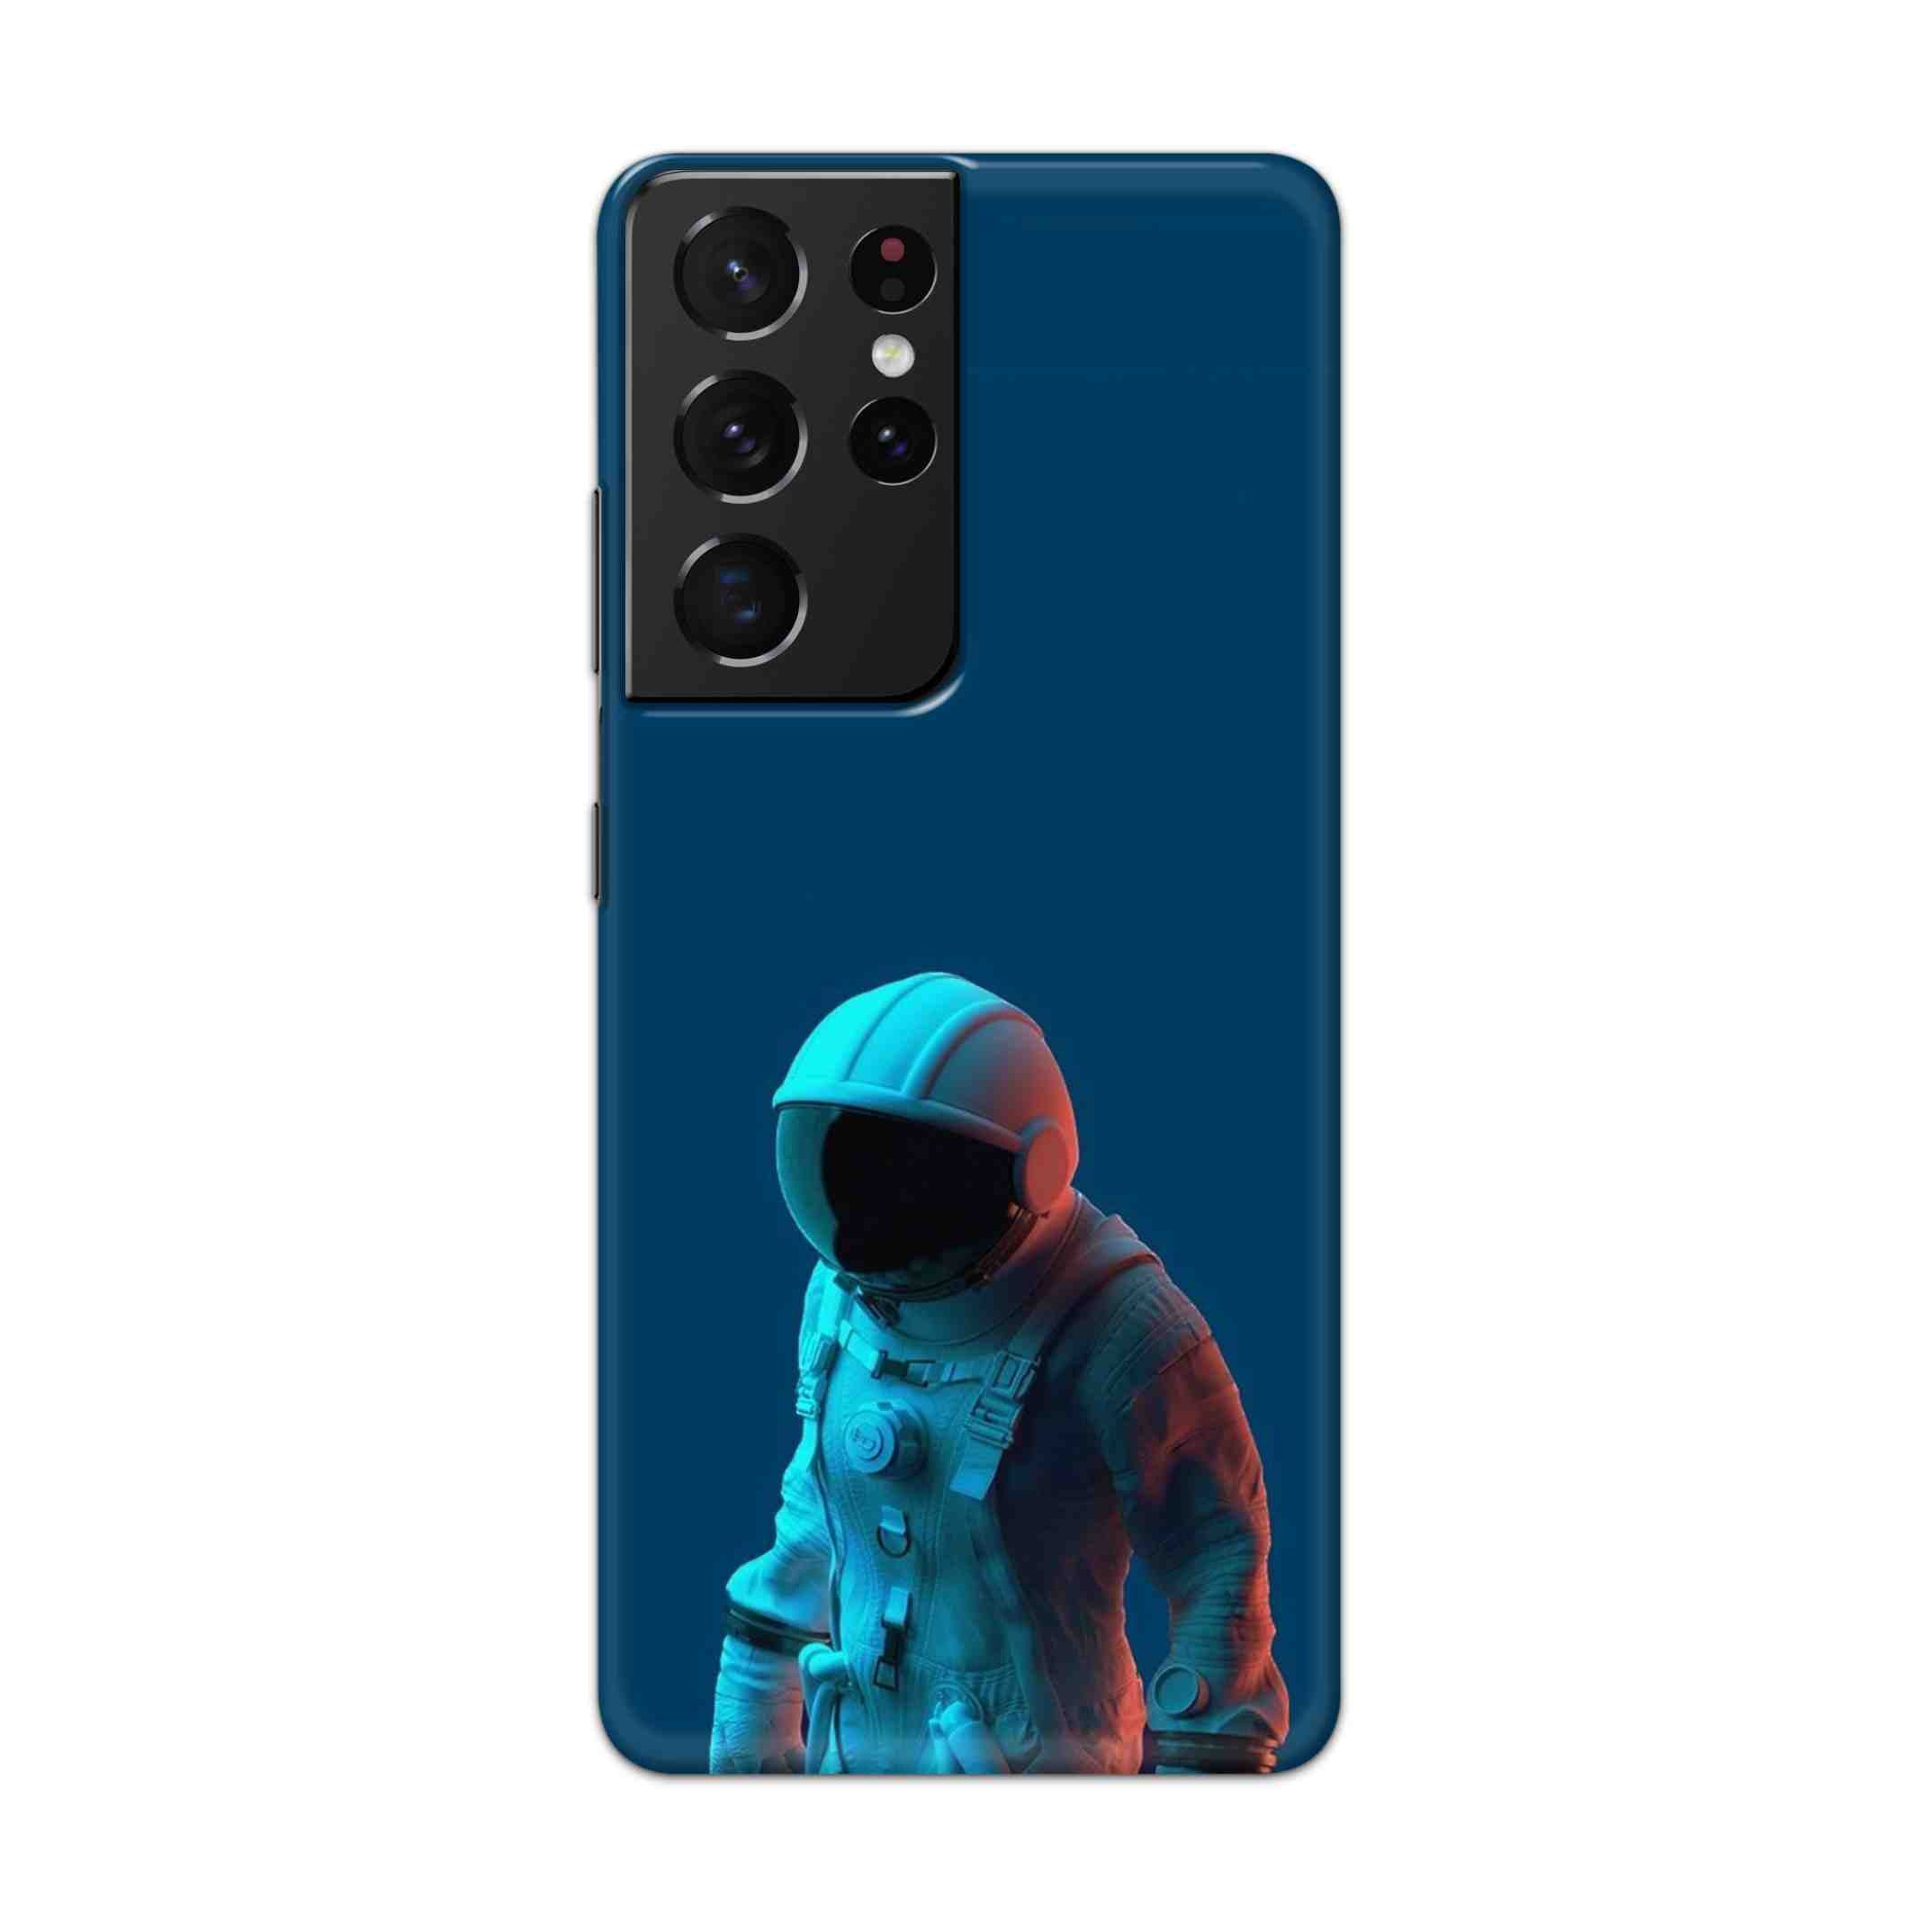 Buy Blue Astronaut Hard Back Mobile Phone Case Cover For Samsung Galaxy S21 Ultra Online